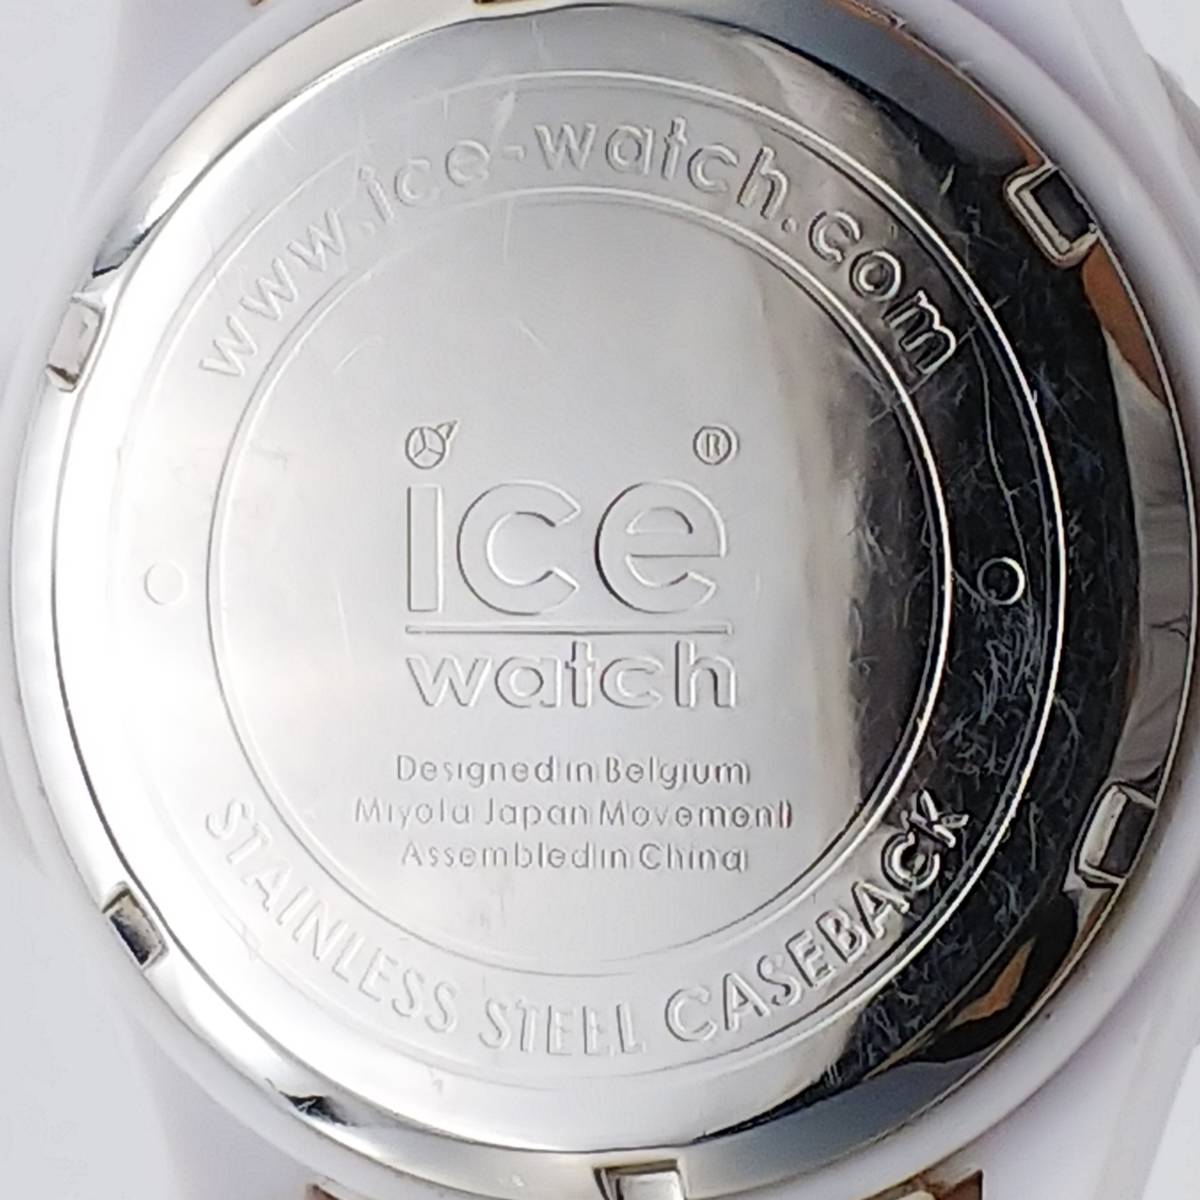 ice watch  メンズ腕時計 電池交換済み